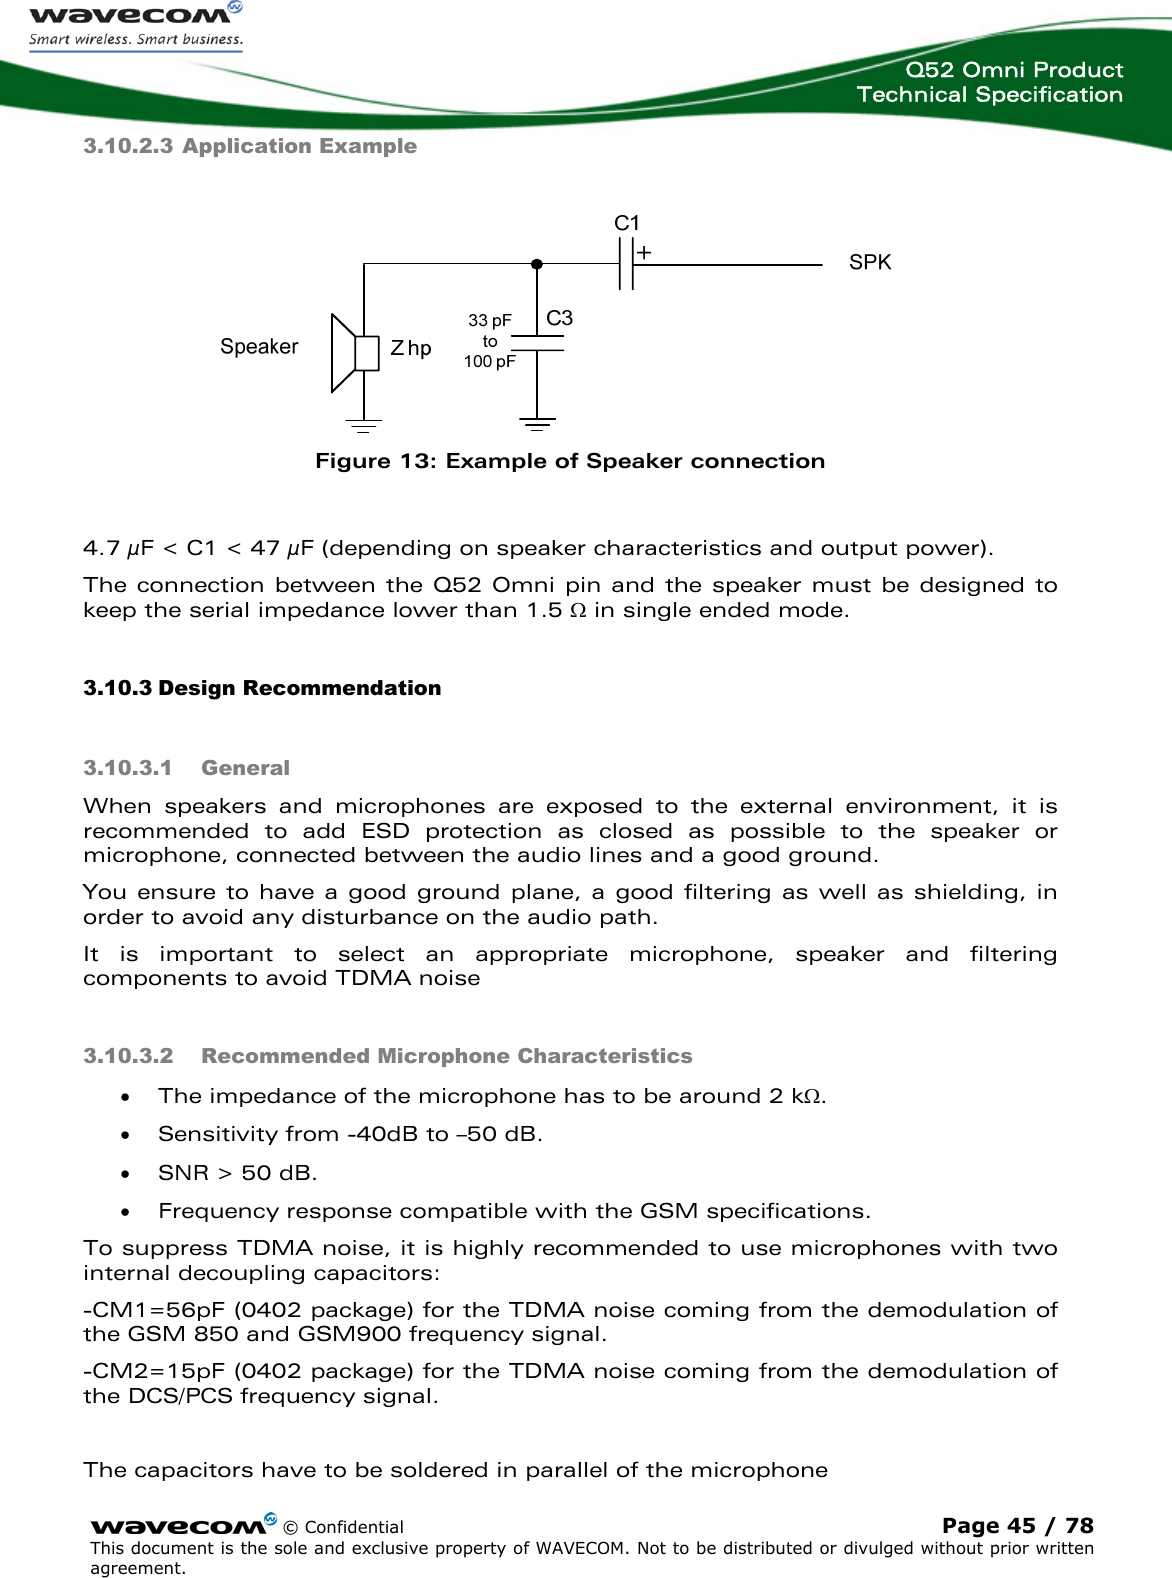  Q52 Omni Product Technical Specification    © Confidential Page 45 / 78 This document is the sole and exclusive property of WAVECOM. Not to be distributed or divulged without prior written agreement.  3.10.2.3 Application Example   Figure 13: Example of Speaker connection  4.7 μF &lt; C1 &lt; 47 μF (depending on speaker characteristics and output power). The connection between the Q52 Omni pin and the speaker must be designed to keep the serial impedance lower than 1.5 Ω in single ended mode. 3.10.3 Design Recommendation 3.10.3.1 General When speakers and microphones are exposed to the external environment, it is recommended to add ESD protection as closed as possible to the speaker or microphone, connected between the audio lines and a good ground. You ensure to have a good ground plane, a good filtering as well as shielding, in order to avoid any disturbance on the audio path. It is important to select an appropriate microphone, speaker and filtering components to avoid TDMA noise 3.10.3.2 Recommended Microphone Characteristics • The impedance of the microphone has to be around 2 kΩ. • Sensitivity from -40dB to –50 dB.  • SNR &gt; 50 dB. • Frequency response compatible with the GSM specifications. To suppress TDMA noise, it is highly recommended to use microphones with two internal decoupling capacitors: -CM1=56pF (0402 package) for the TDMA noise coming from the demodulation of the GSM 850 and GSM900 frequency signal. -CM2=15pF (0402 package) for the TDMA noise coming from the demodulation of the DCS/PCS frequency signal.  The capacitors have to be soldered in parallel of the microphone 